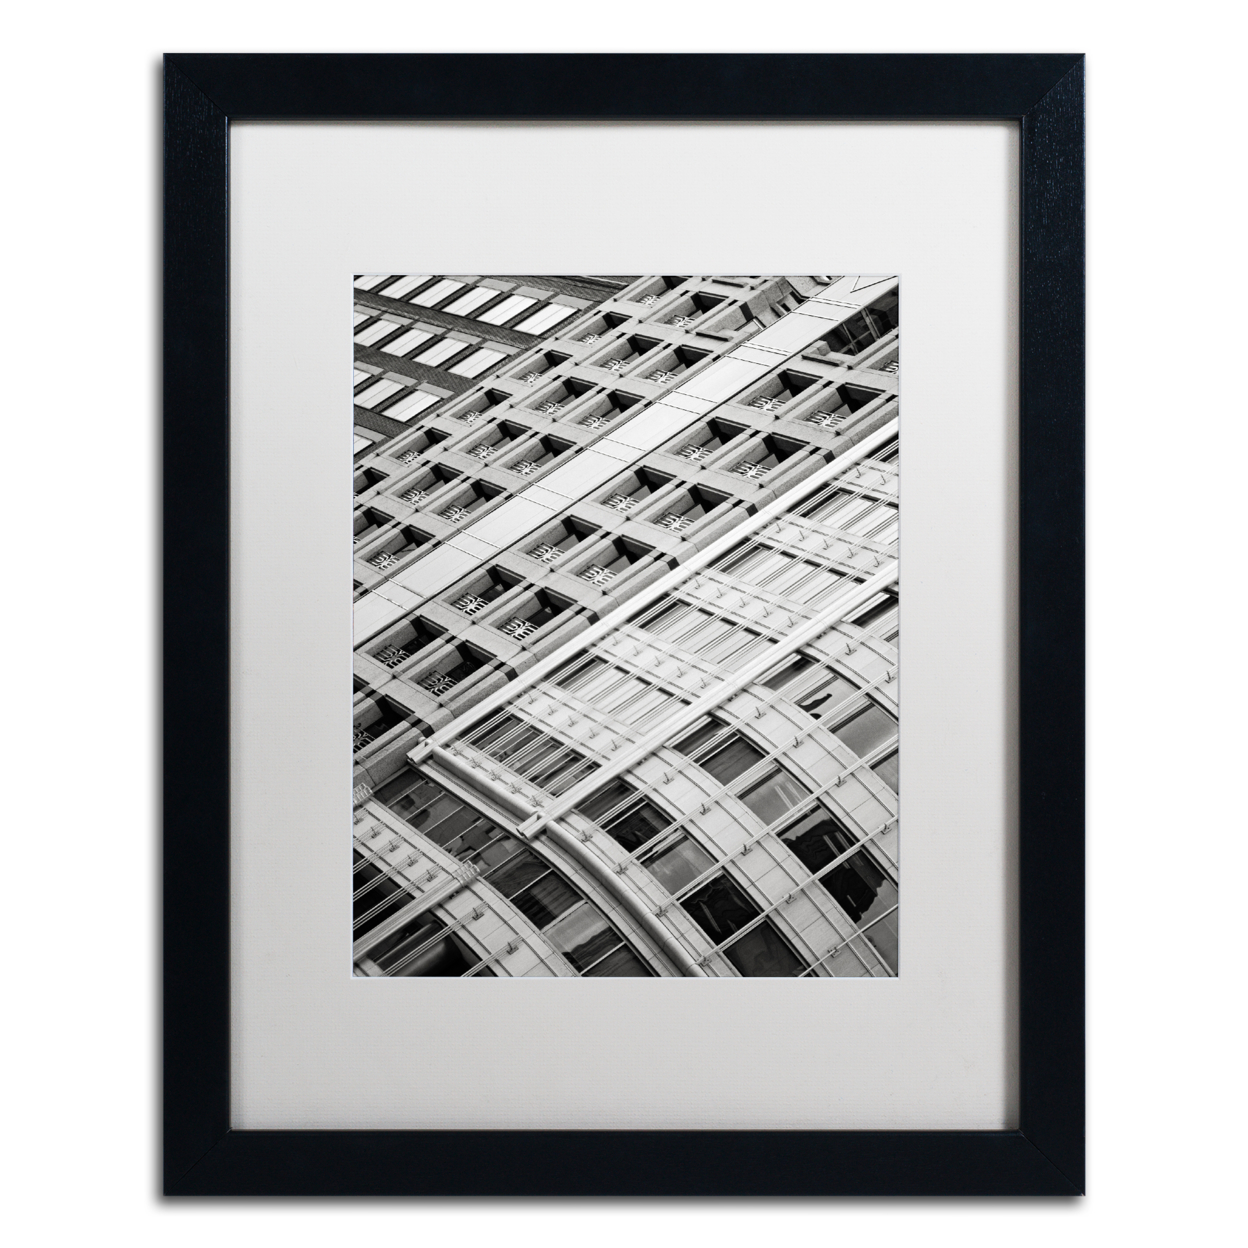 Gregory O'Hanlon 'Buildings-NY Ave' Black Wooden Framed Art 18 X 22 Inches